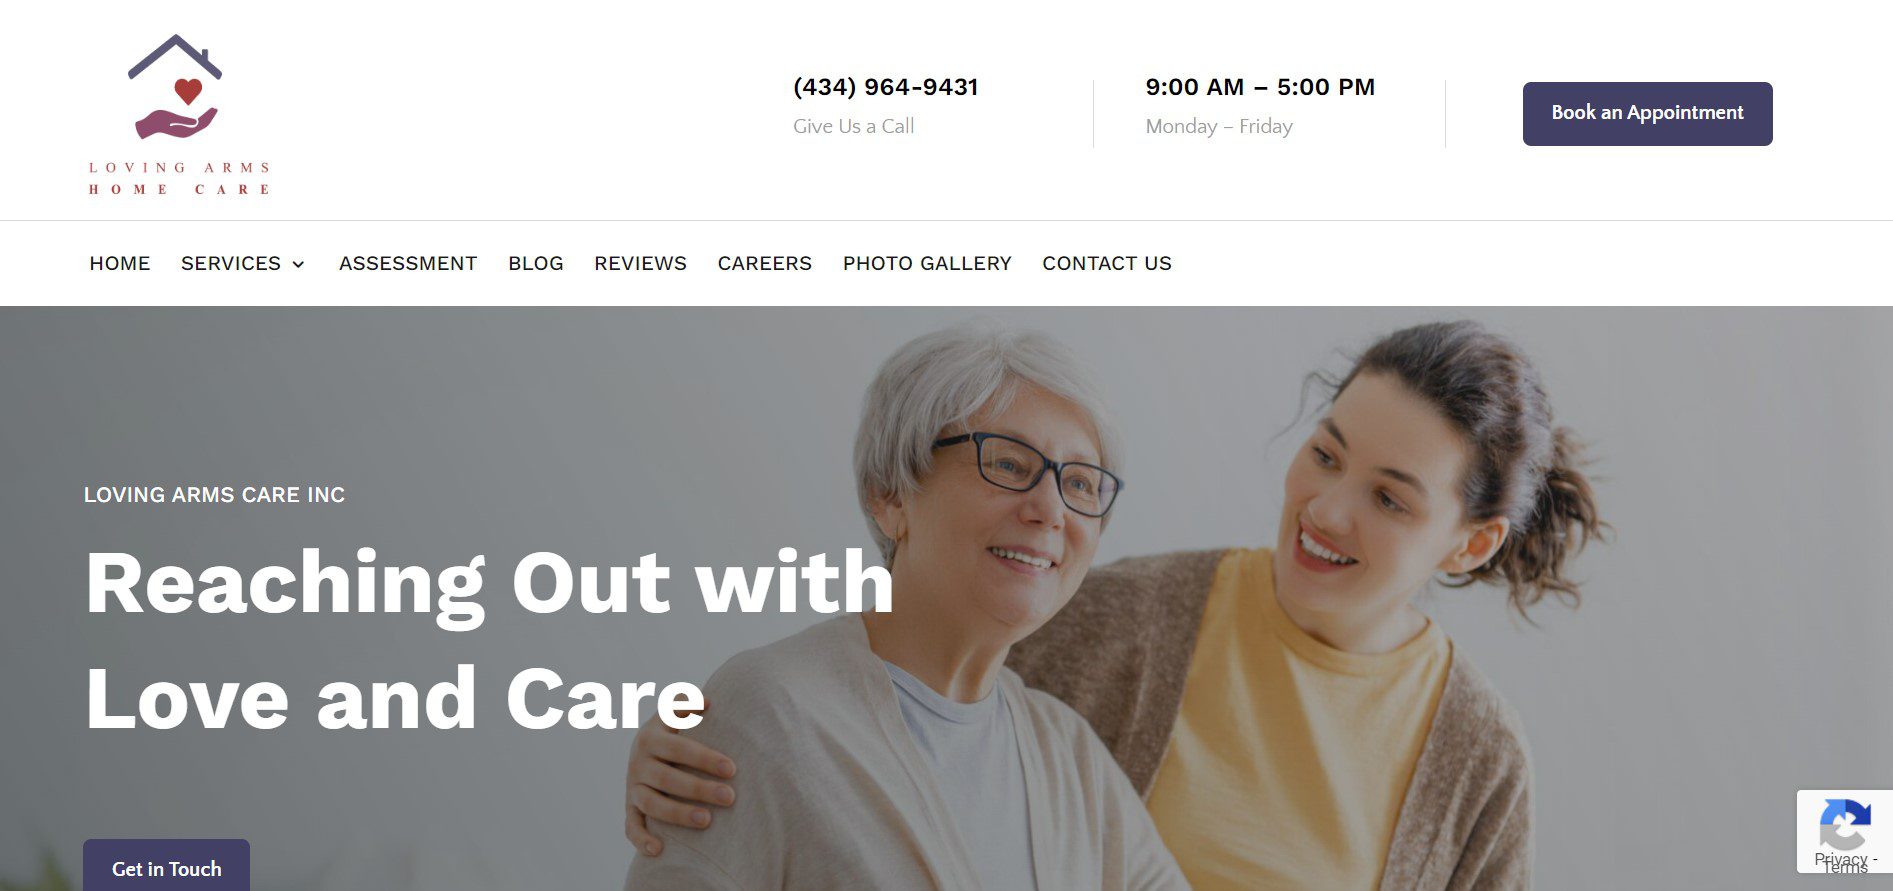 Loving Arms Care Website picture